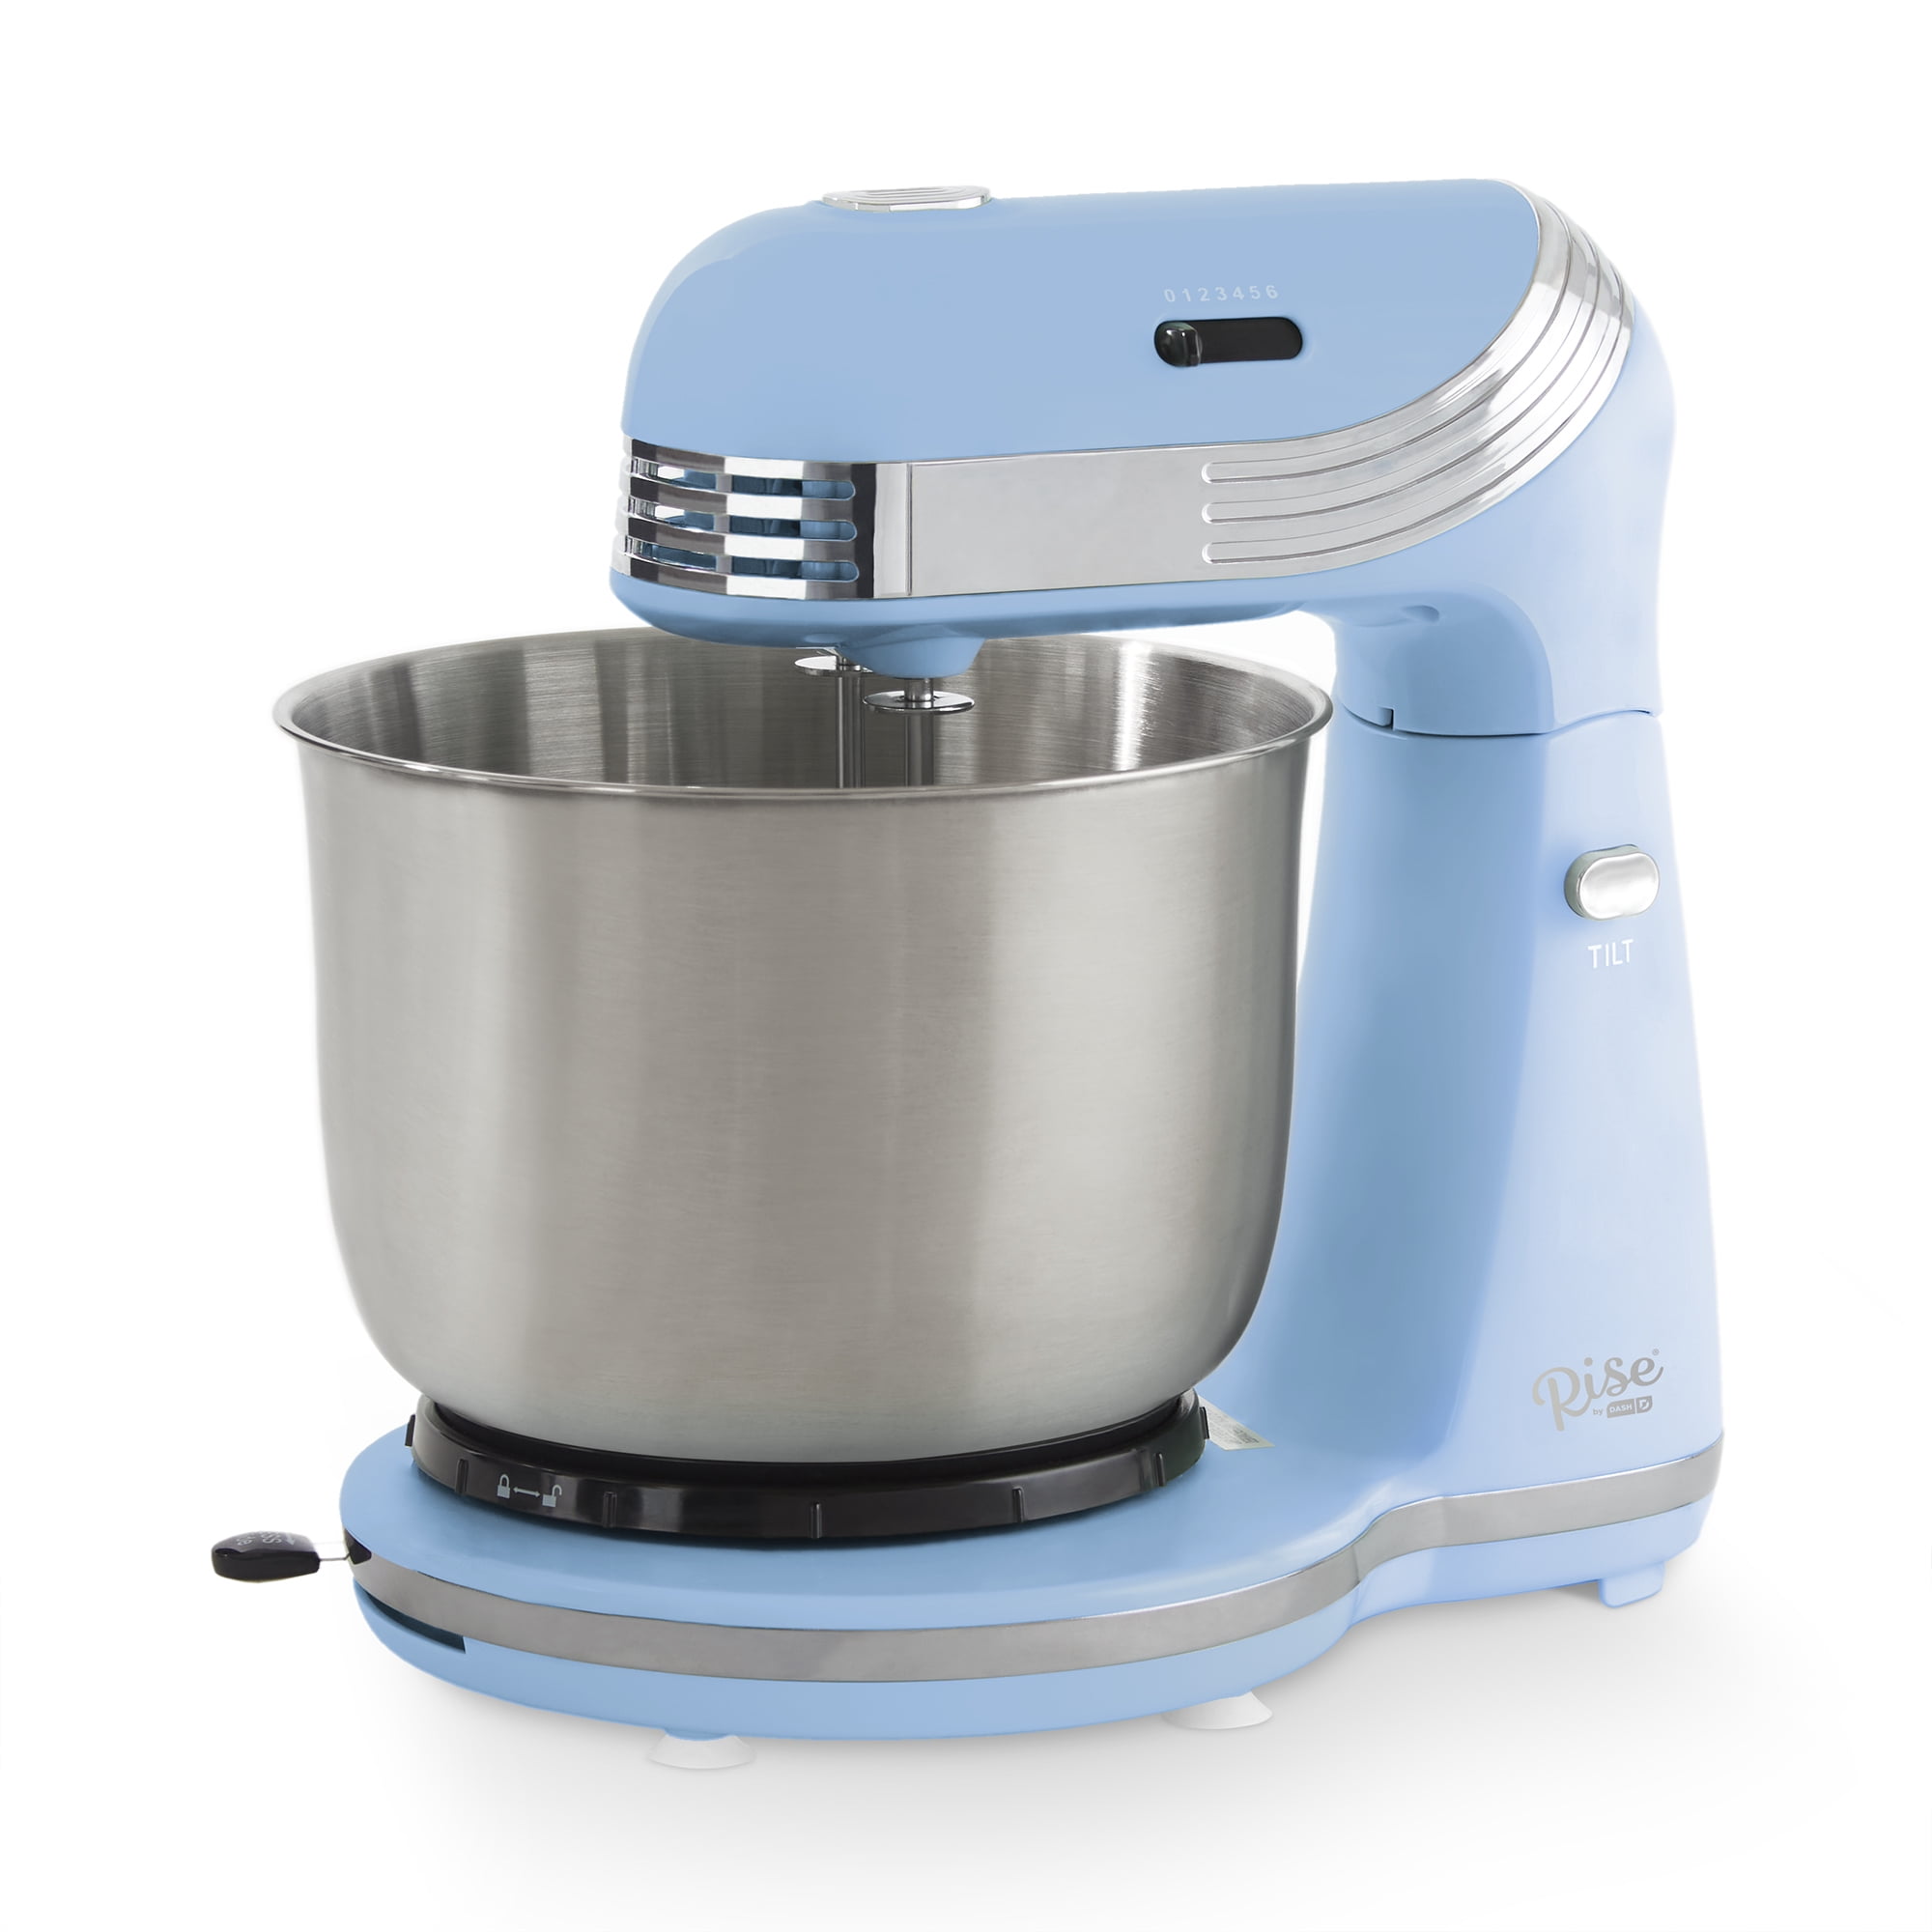 Rise by Dash 6 Speed Stand Mixer, 3 qt - Sky Blue